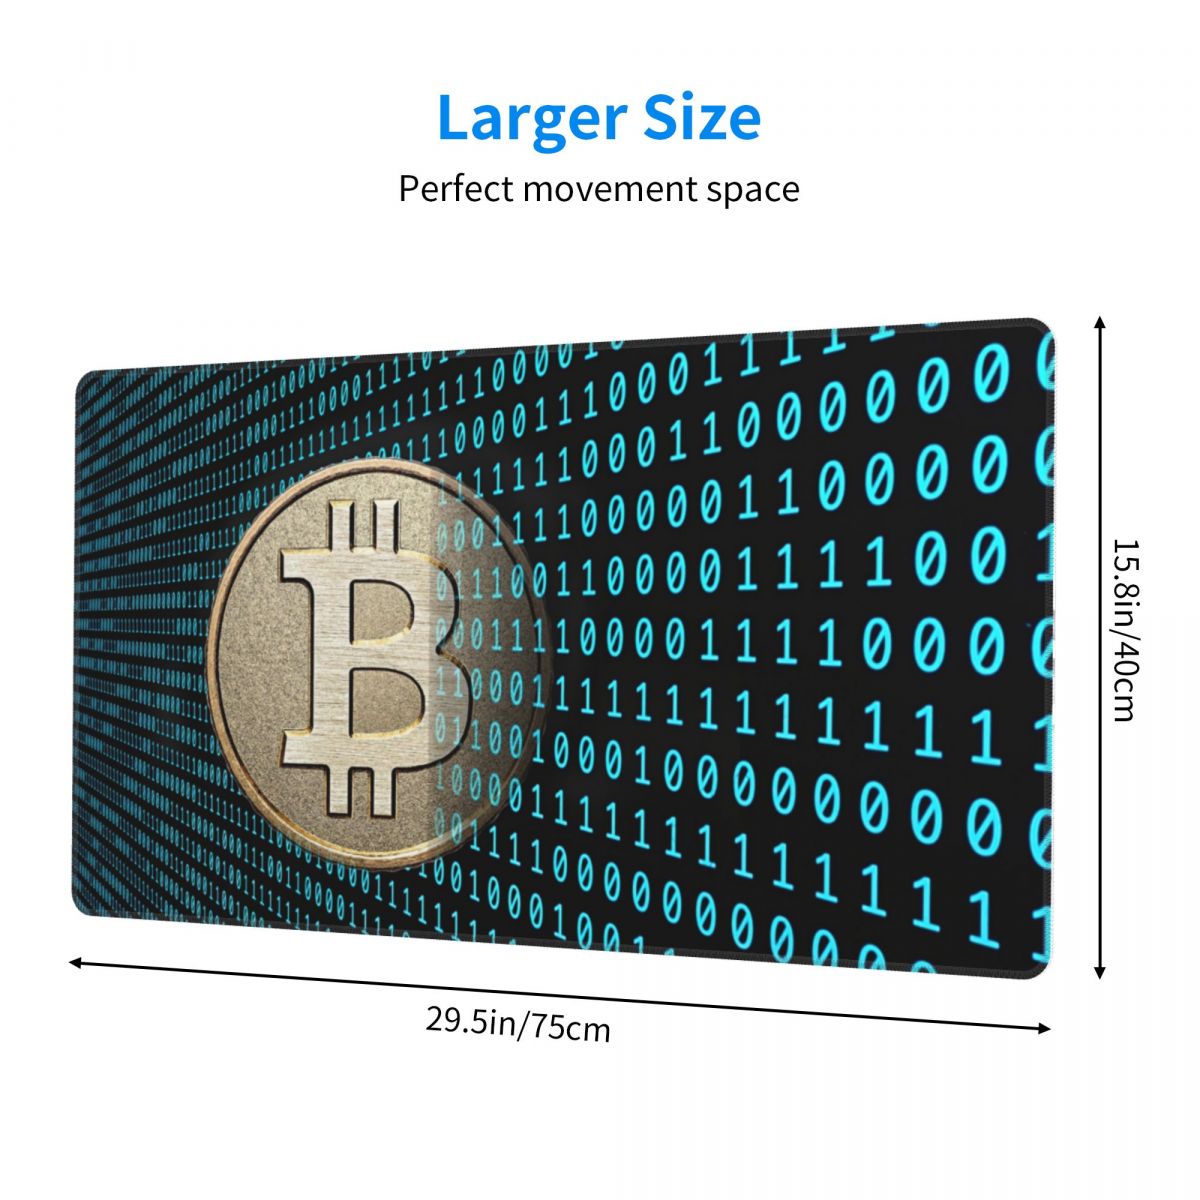 Bitcoin BTC Cryptocurrency Gaming Mouse Pad Keyboard Table Mat